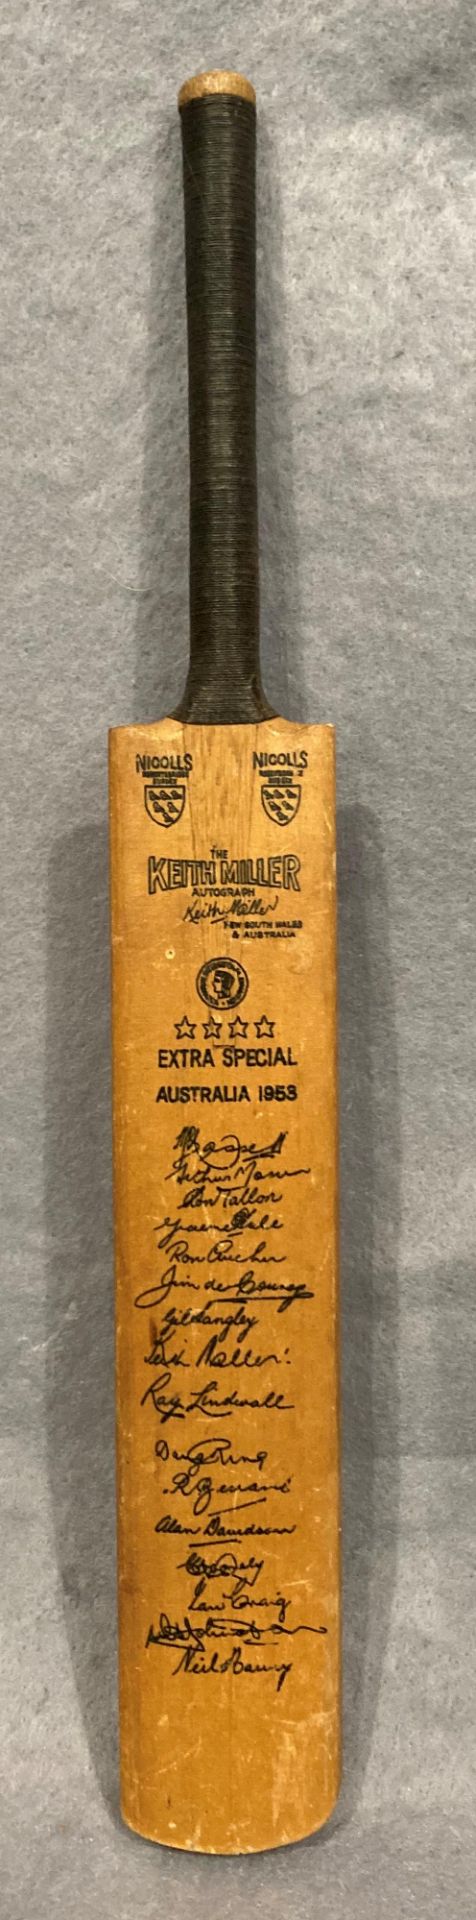 A miniature cricket 'Keith Miller' cricket bat featuring the facsimile autographs of the 1953